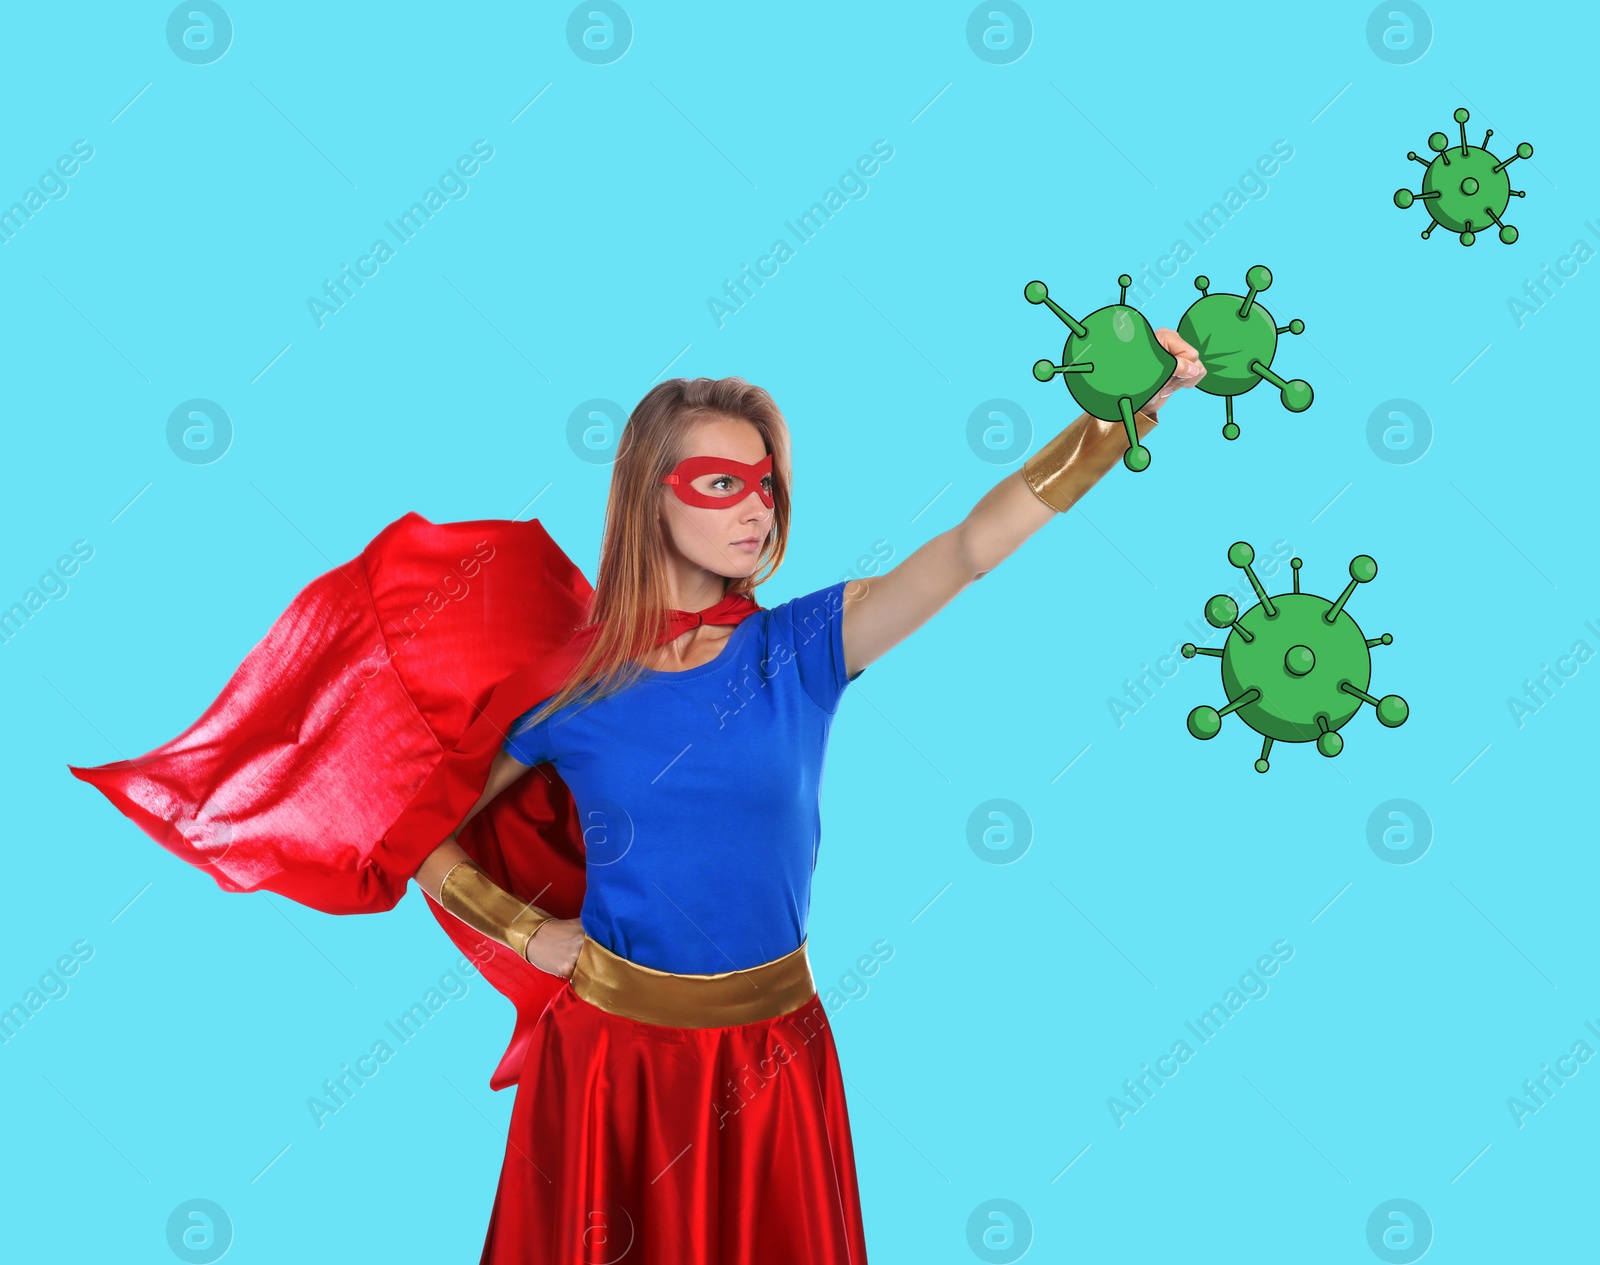 Image of Young woman wearing superhero costume fighting against viruses on turquoise background